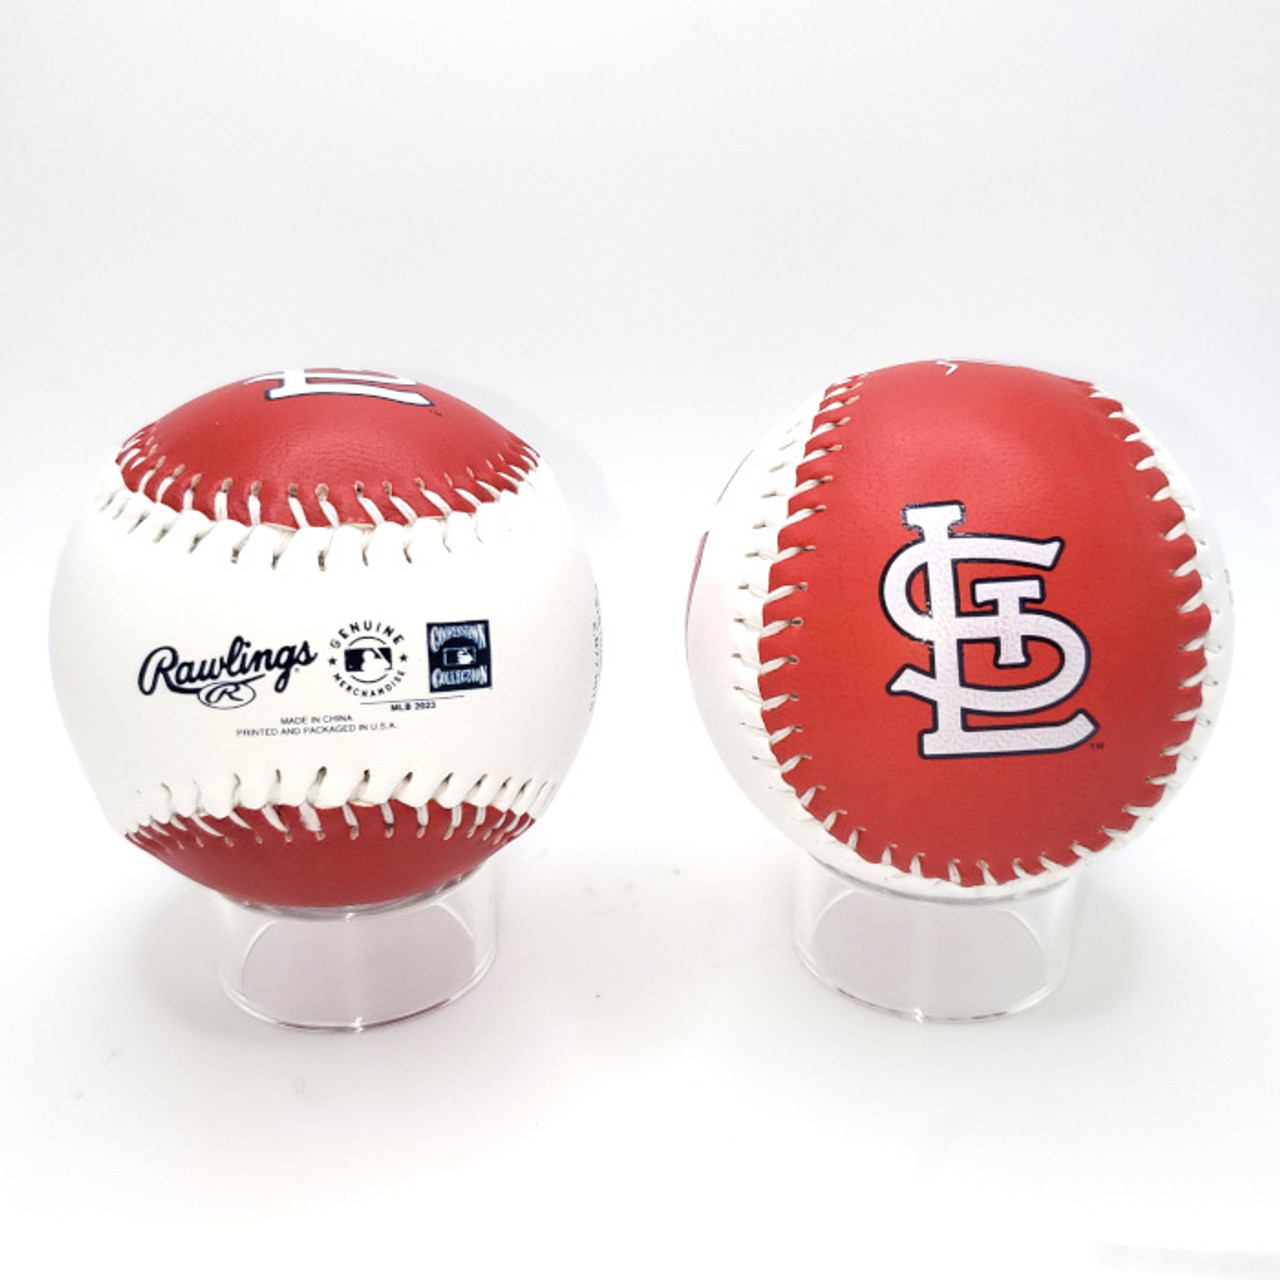 St. Louis Cardinals Baseball Hall of Fame Logo Exclusive